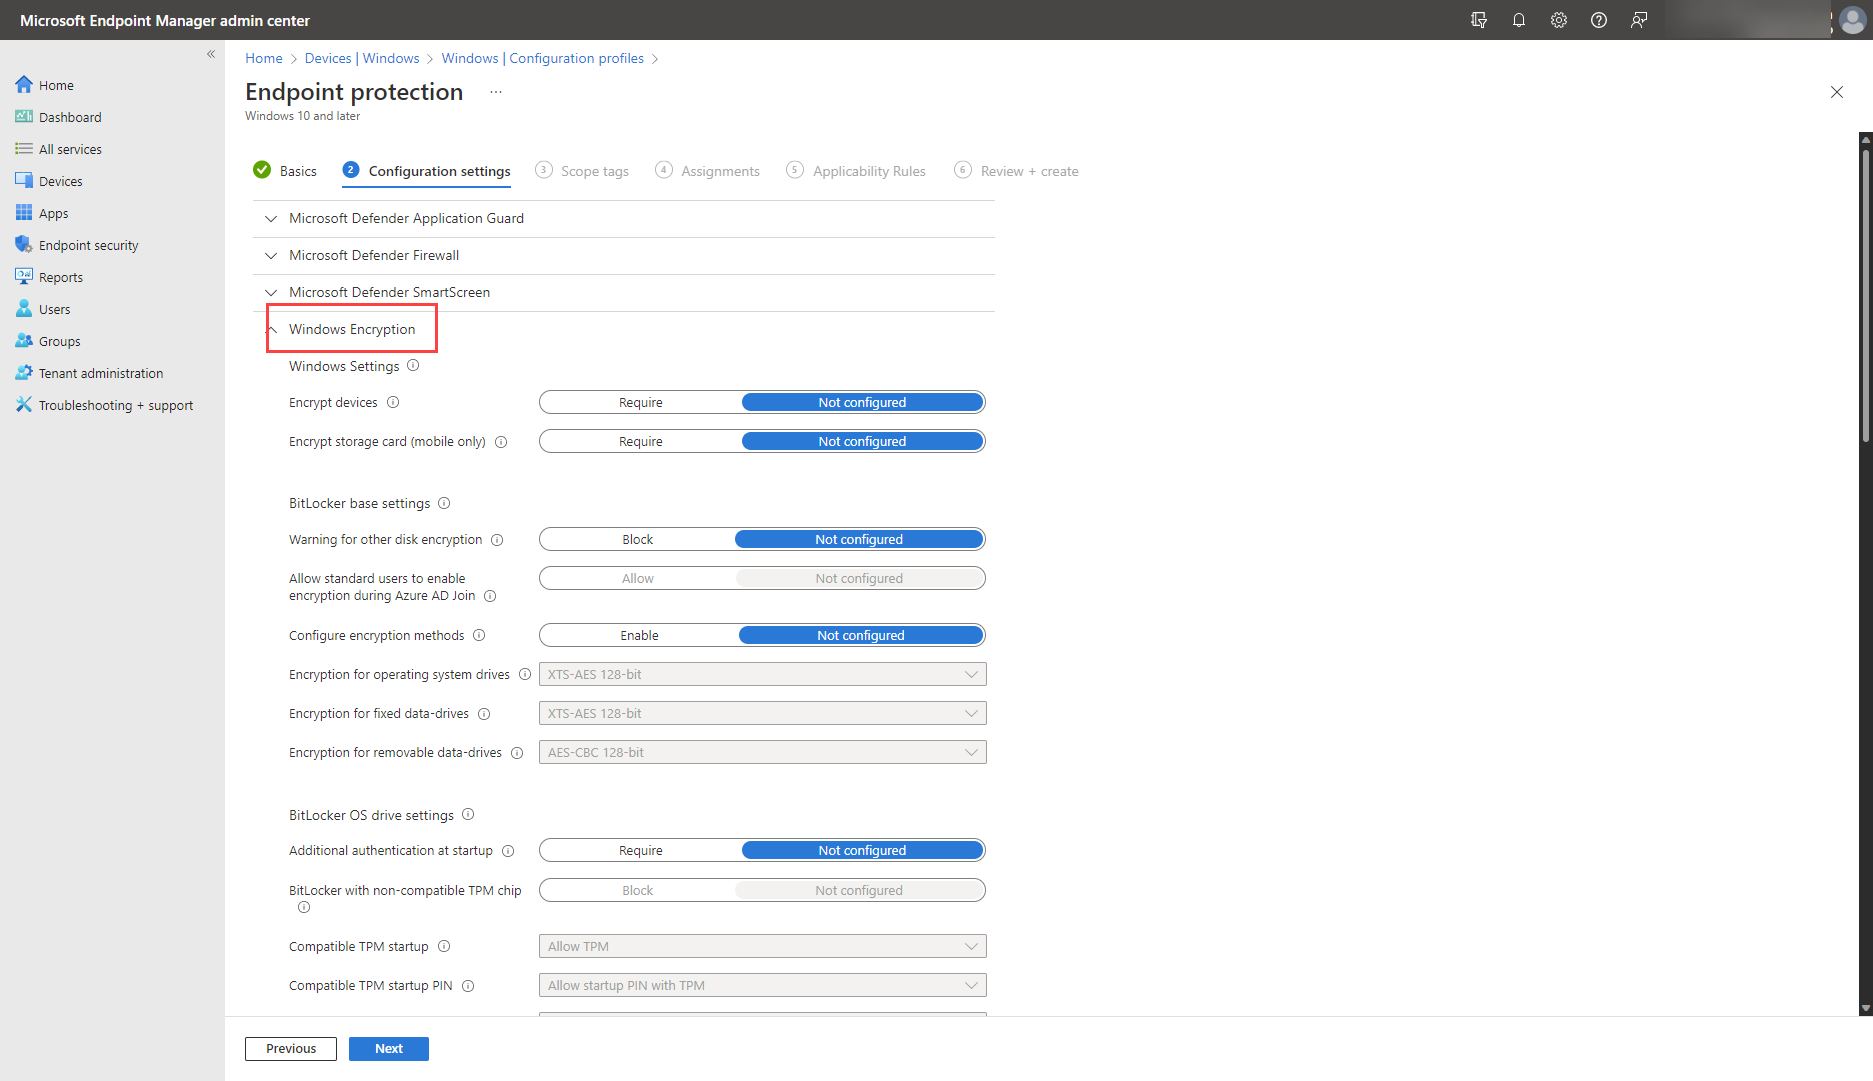 A screenshot of the Microsoft Intune configuration settings for endpoint protection.